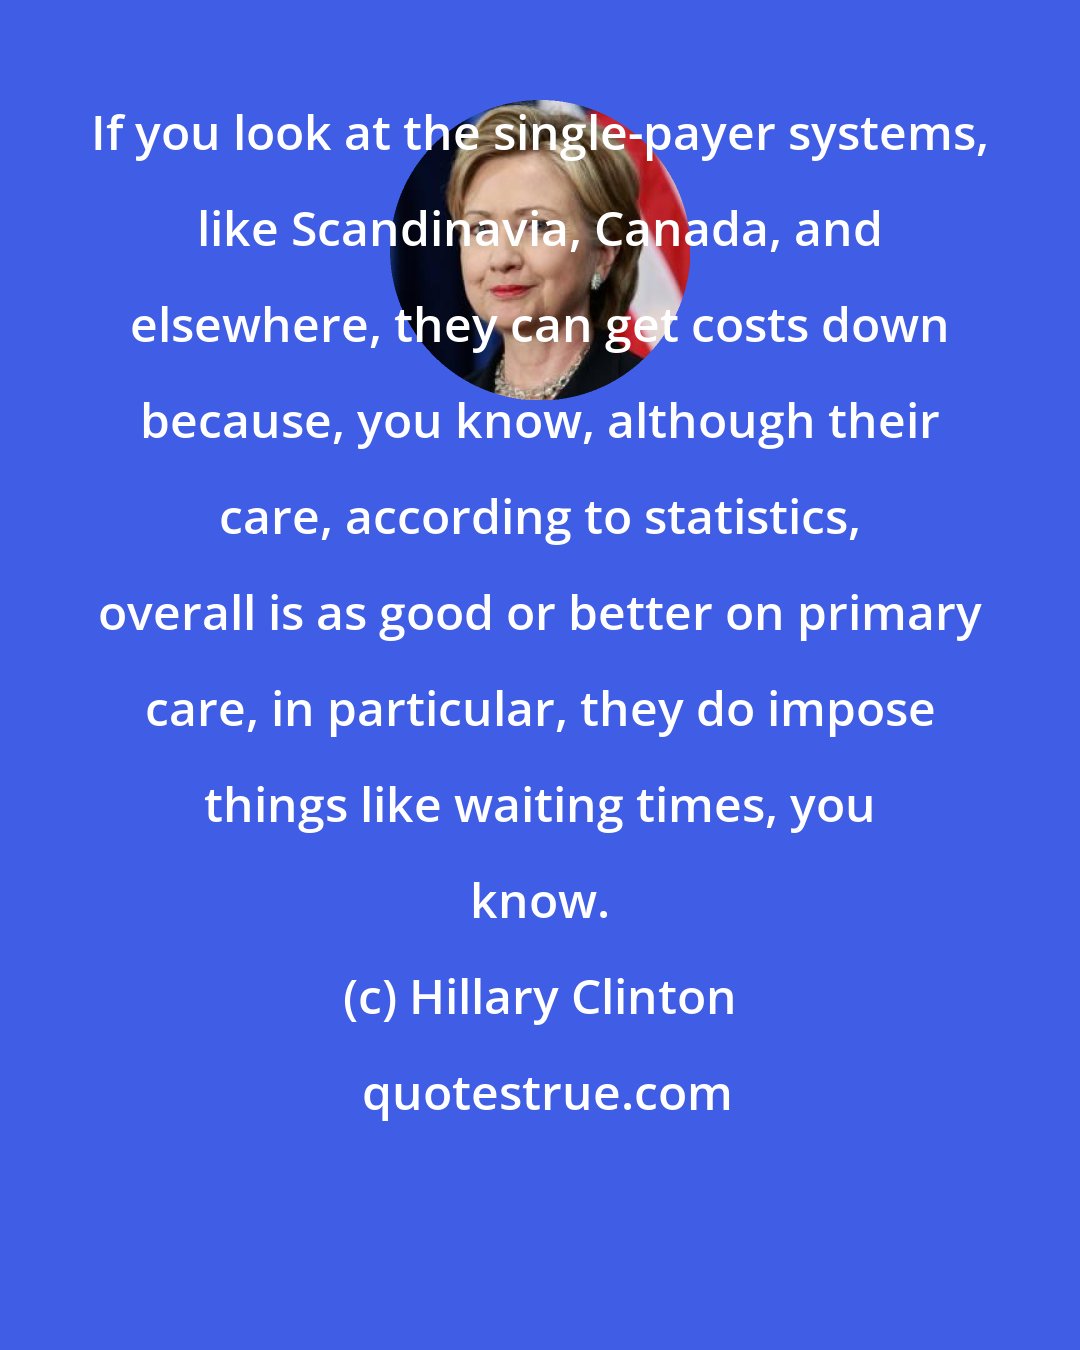 Hillary Clinton: If you look at the single-payer systems, like Scandinavia, Canada, and elsewhere, they can get costs down because, you know, although their care, according to statistics, overall is as good or better on primary care, in particular, they do impose things like waiting times, you know.